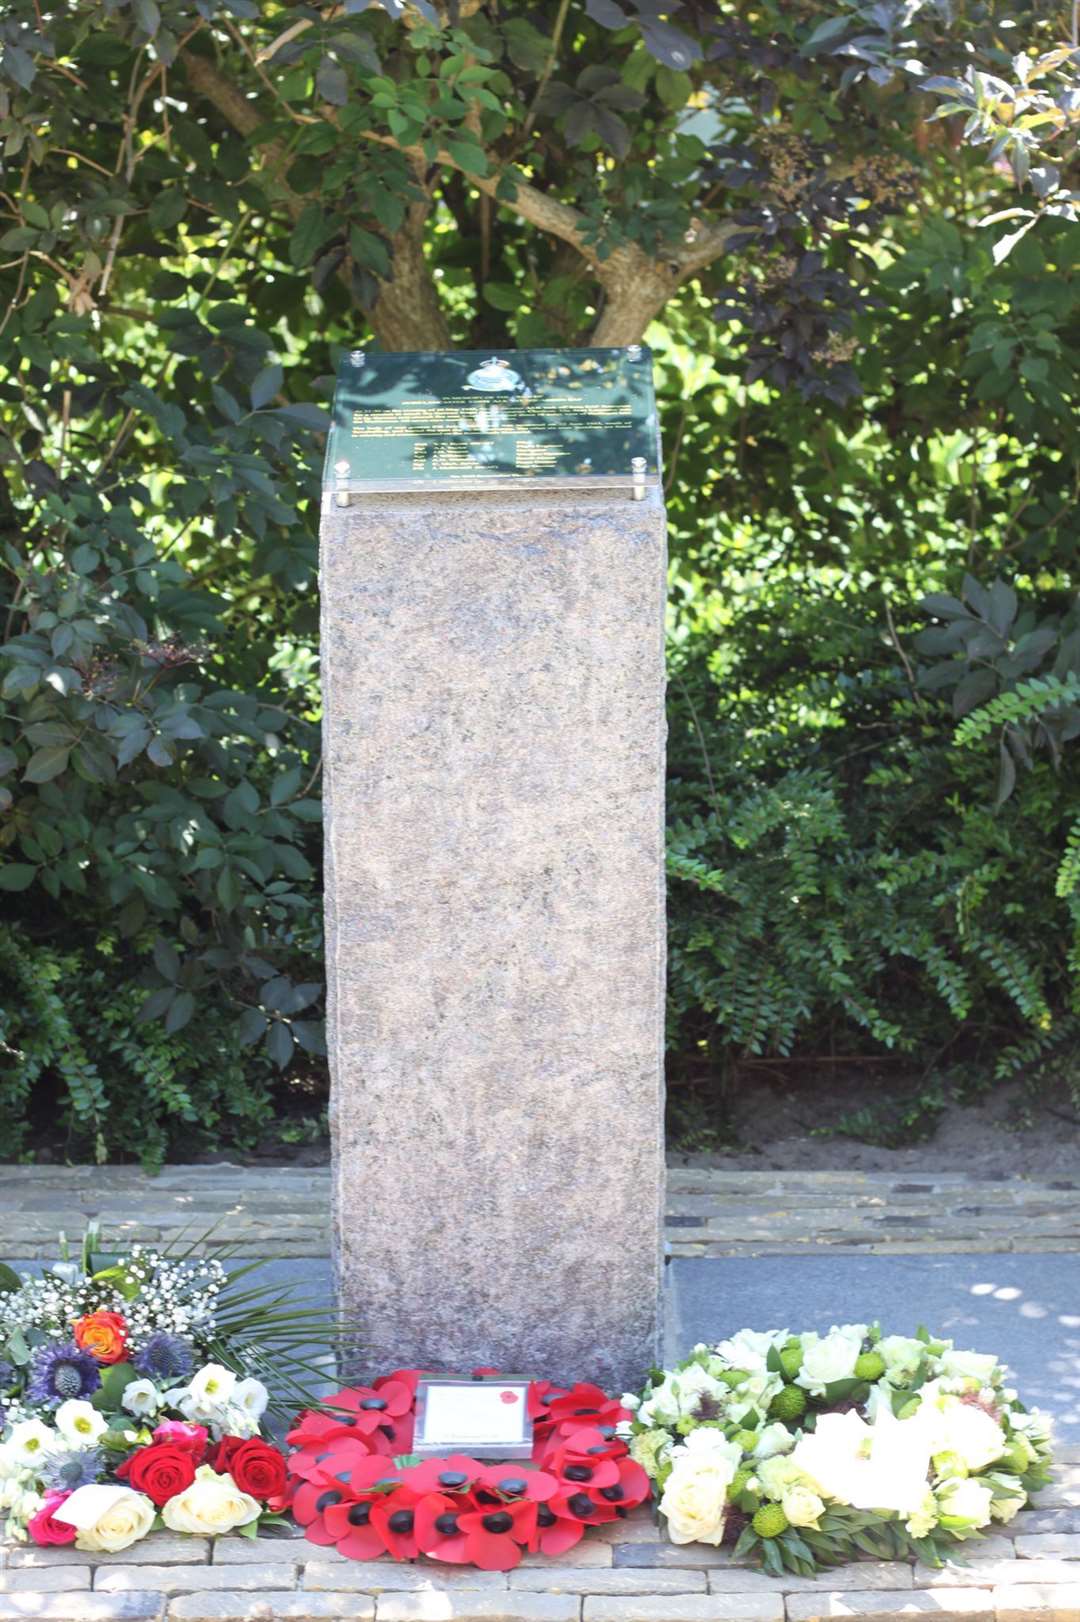 The memorial was instigated by the 617 Squadron Netherlands Aircrew Memorial Squadron.